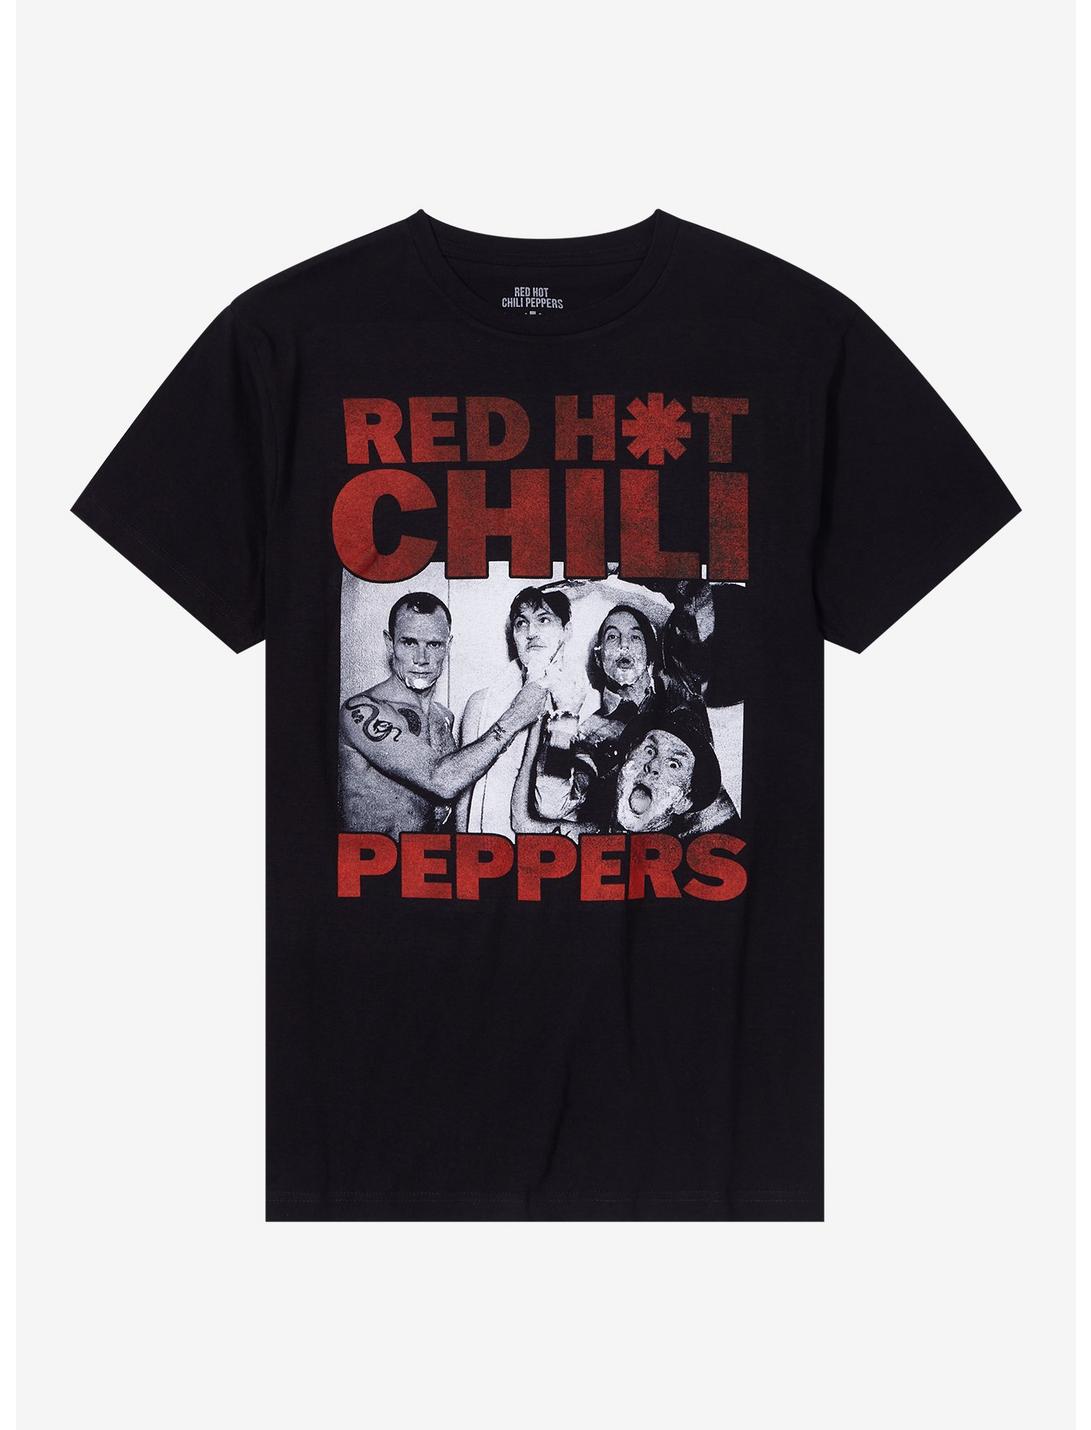 Red Hot Chili Peppers Group Portrait T-Shirt, BLACK, hi-res